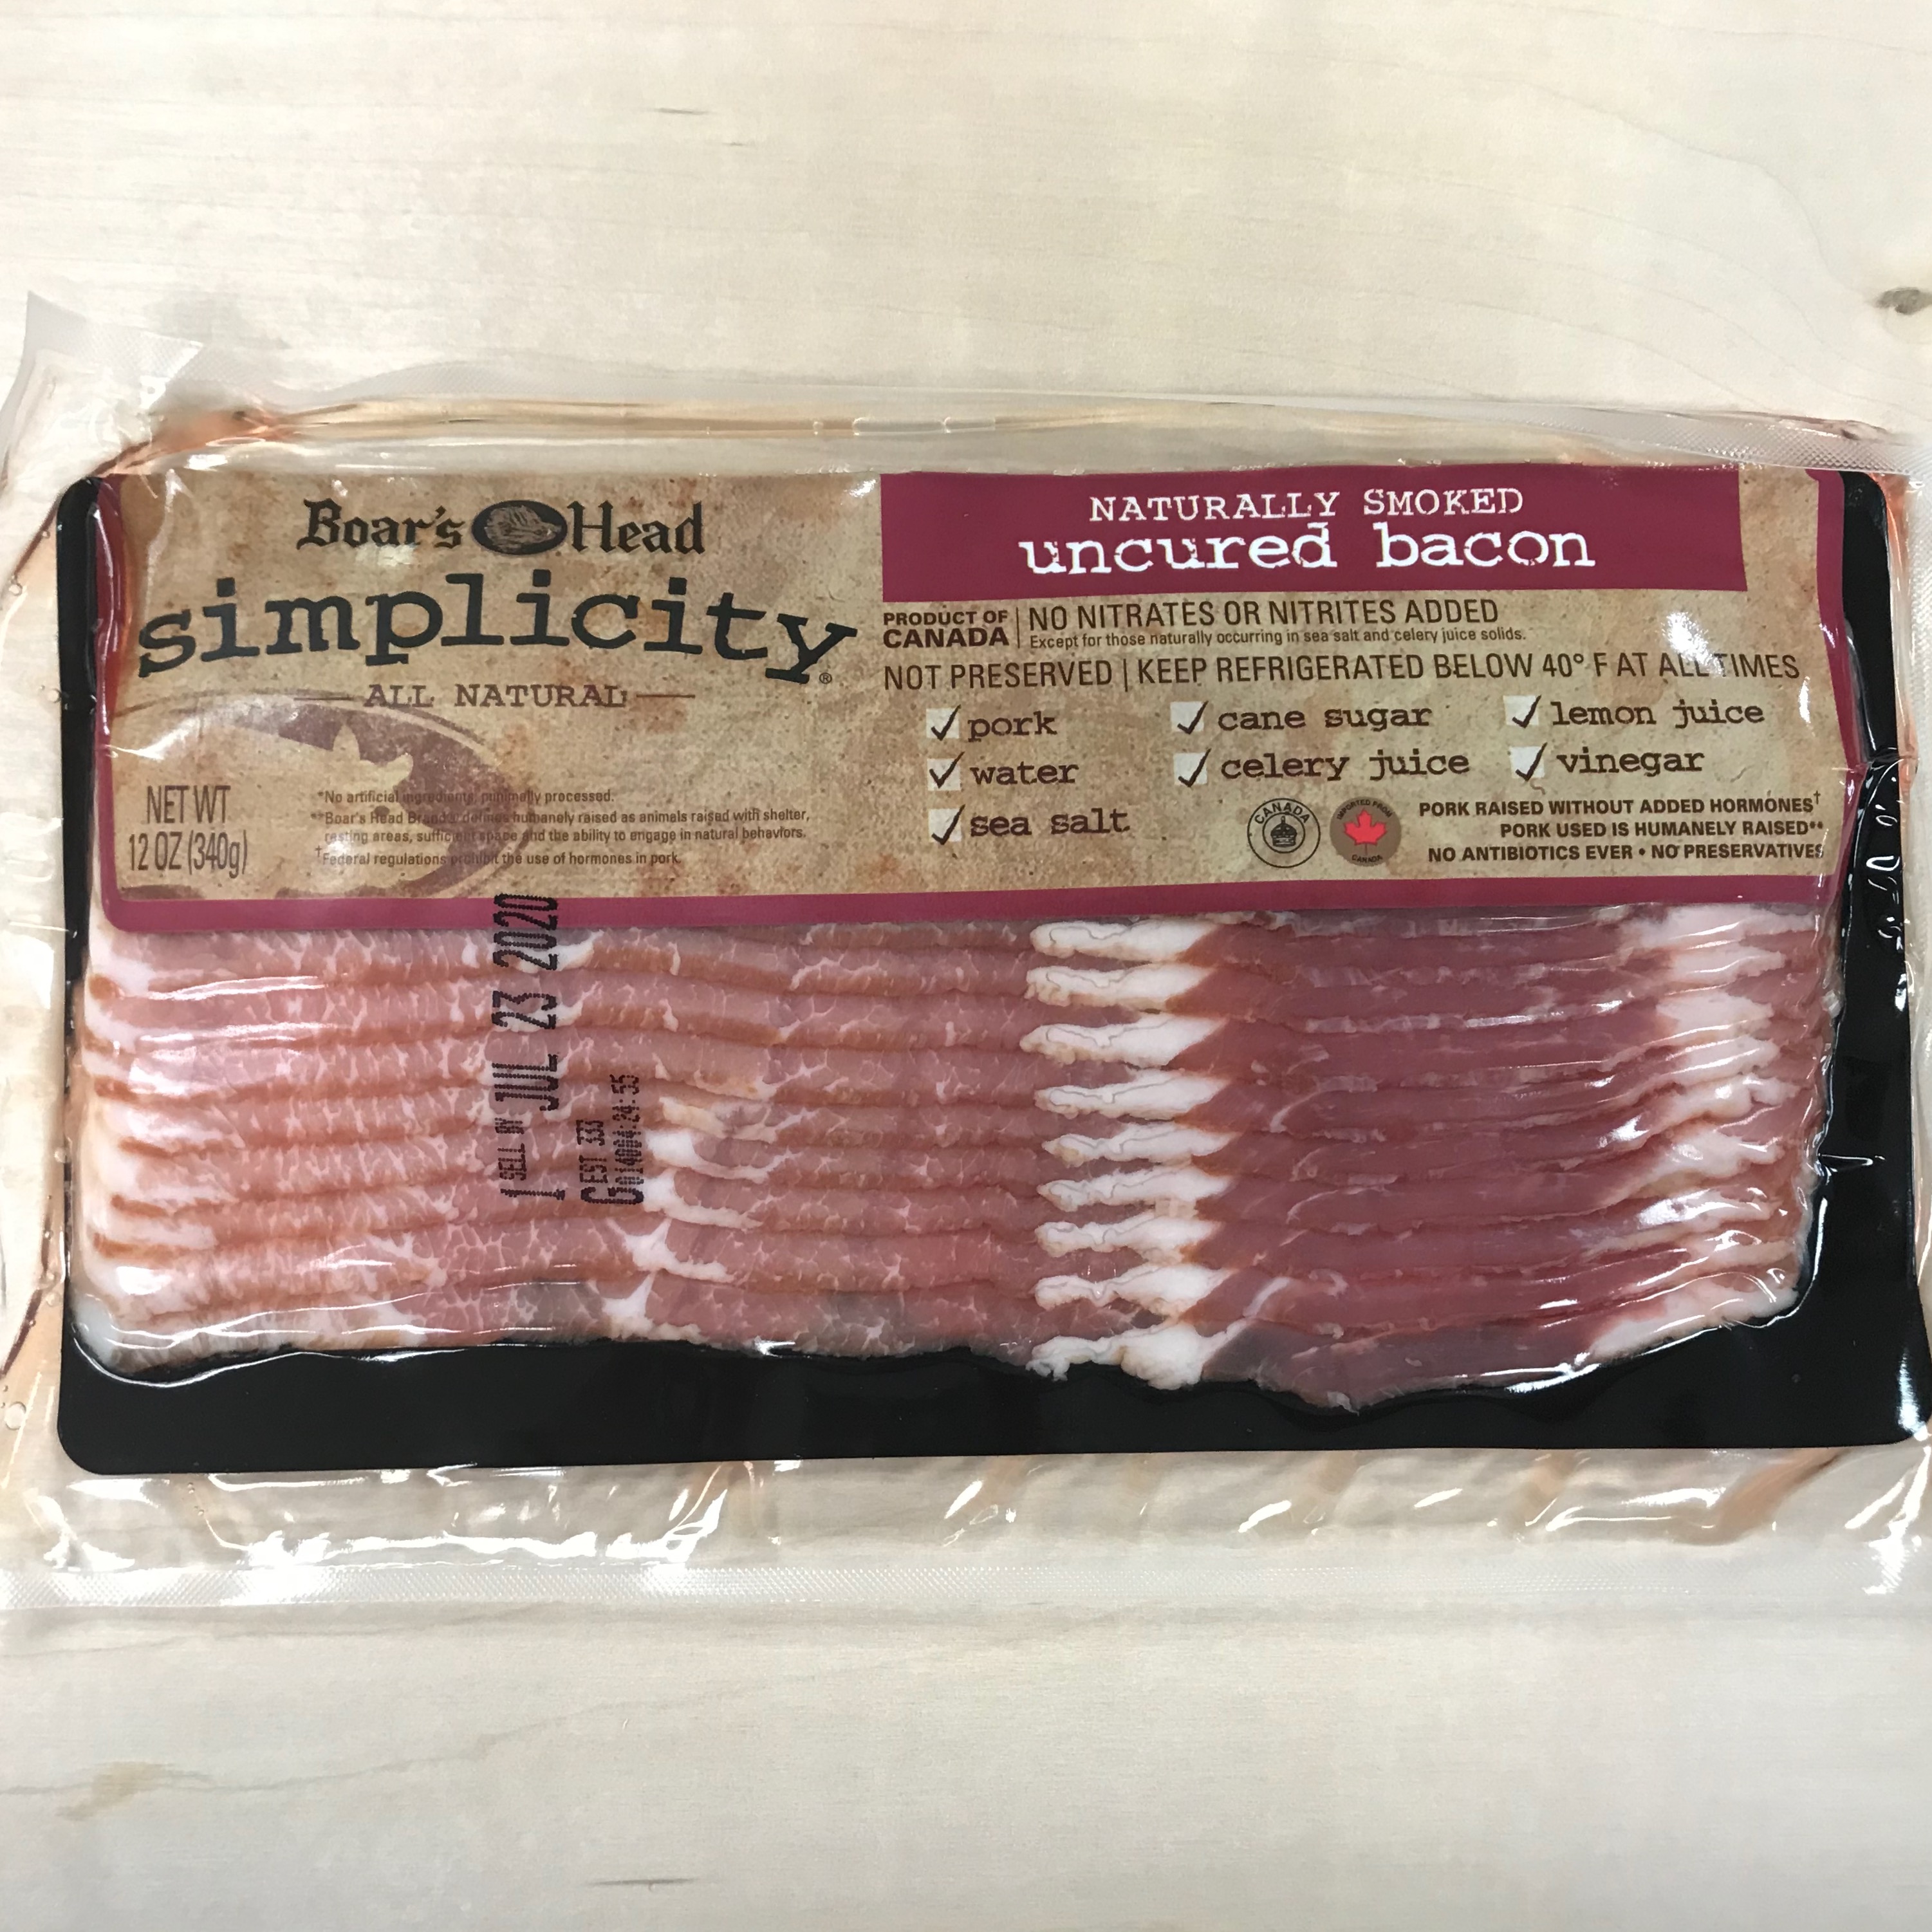 Boar's Head Naturally Smoked Uncured Bacon 12oz